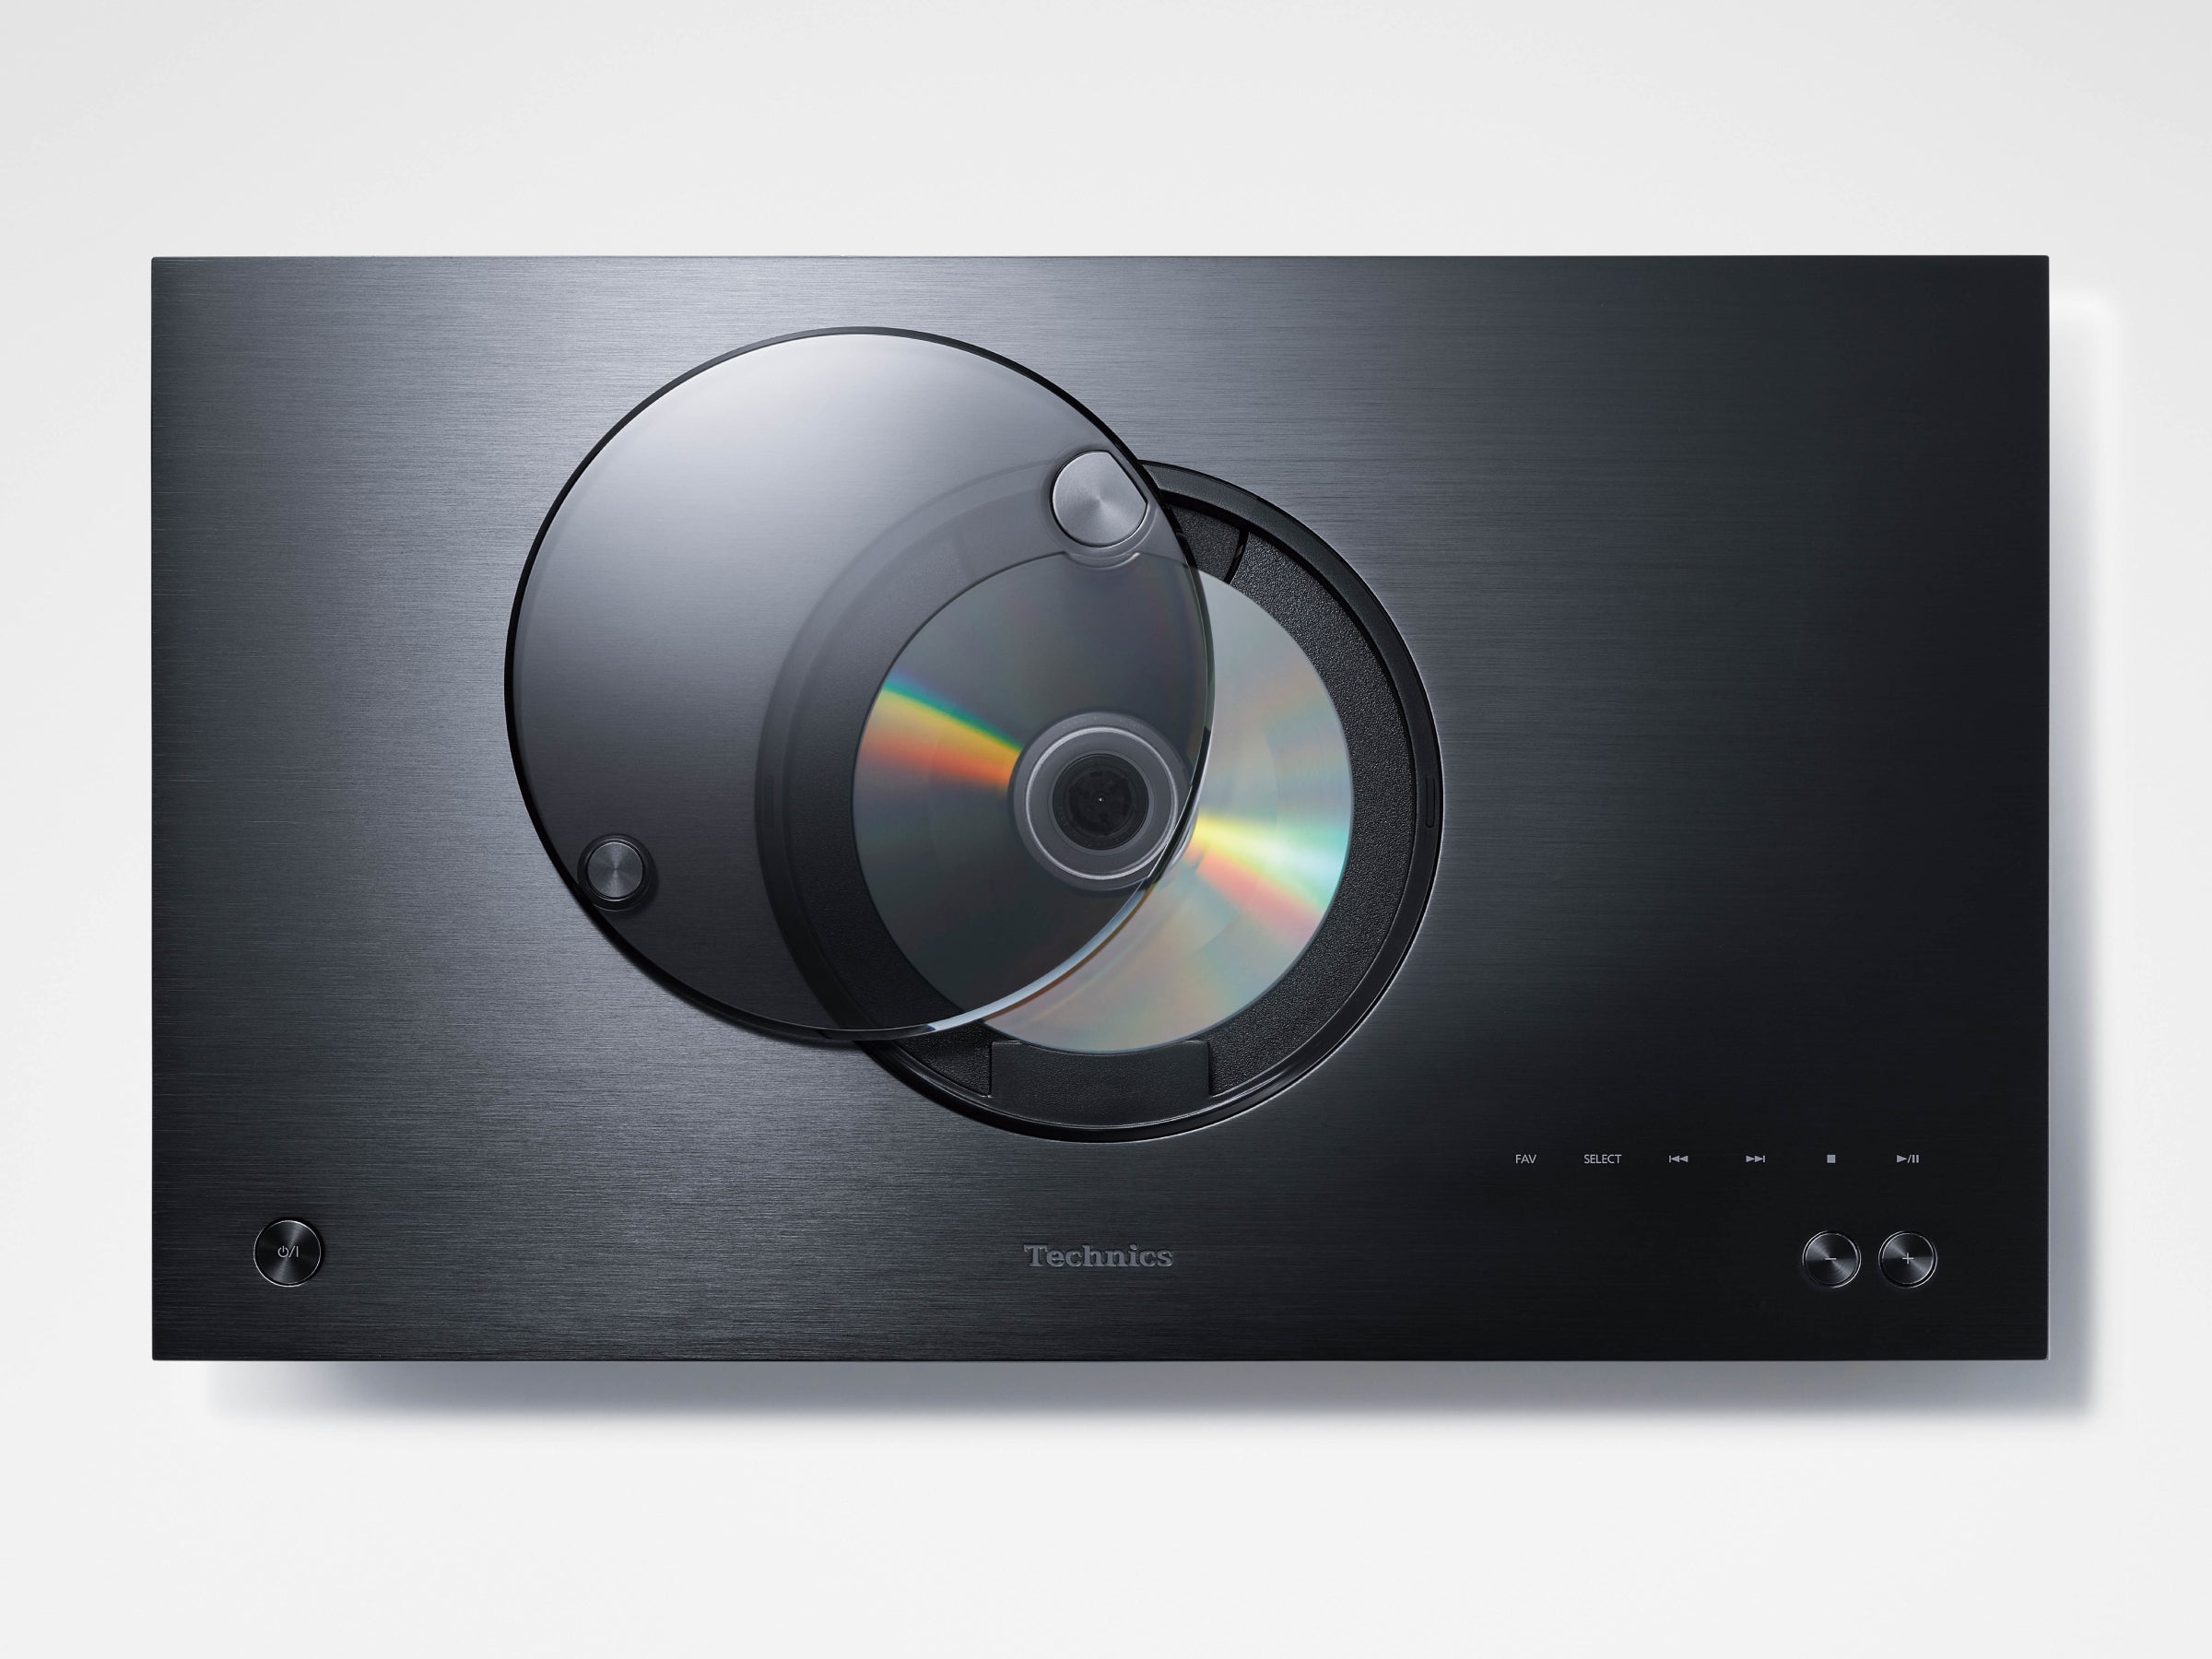 Technics SC-C70 MK2 All-in-One System